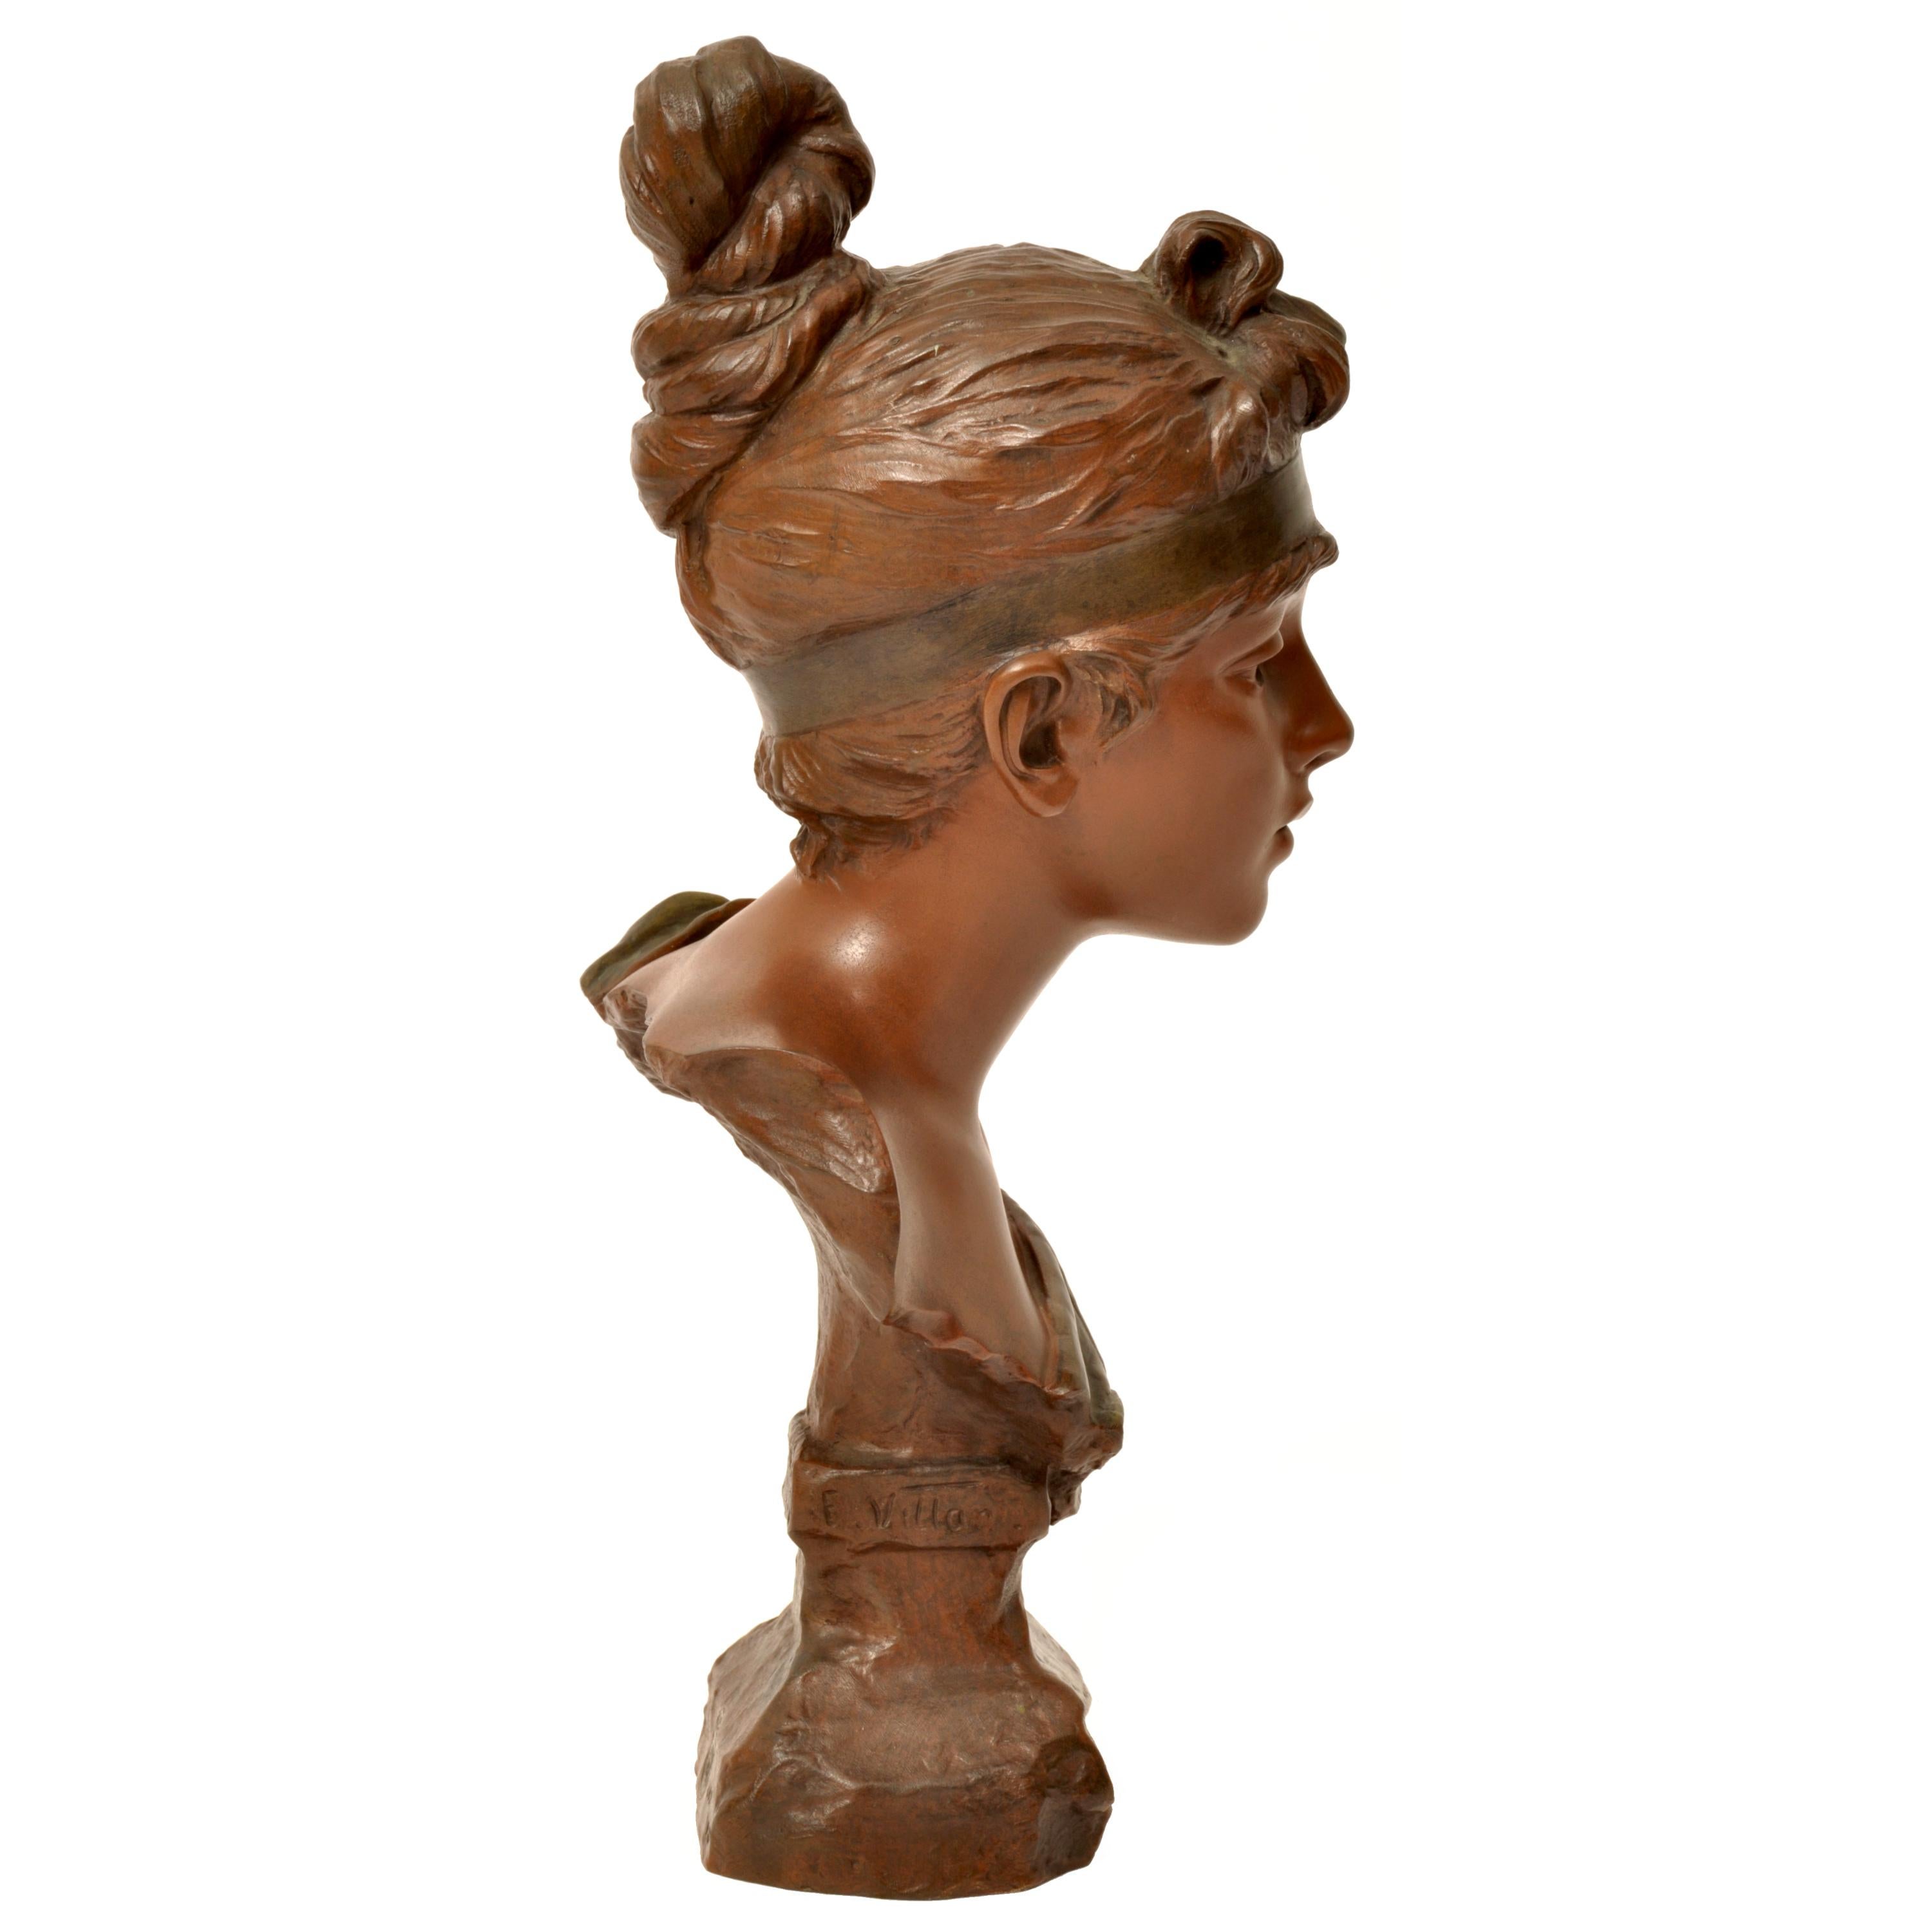 Antique, Art Nouveau bronze of a beautiful maiden in the Neo-Classical manner by Emmanuel Villanis, Circa 1900.
The bronze, titled 